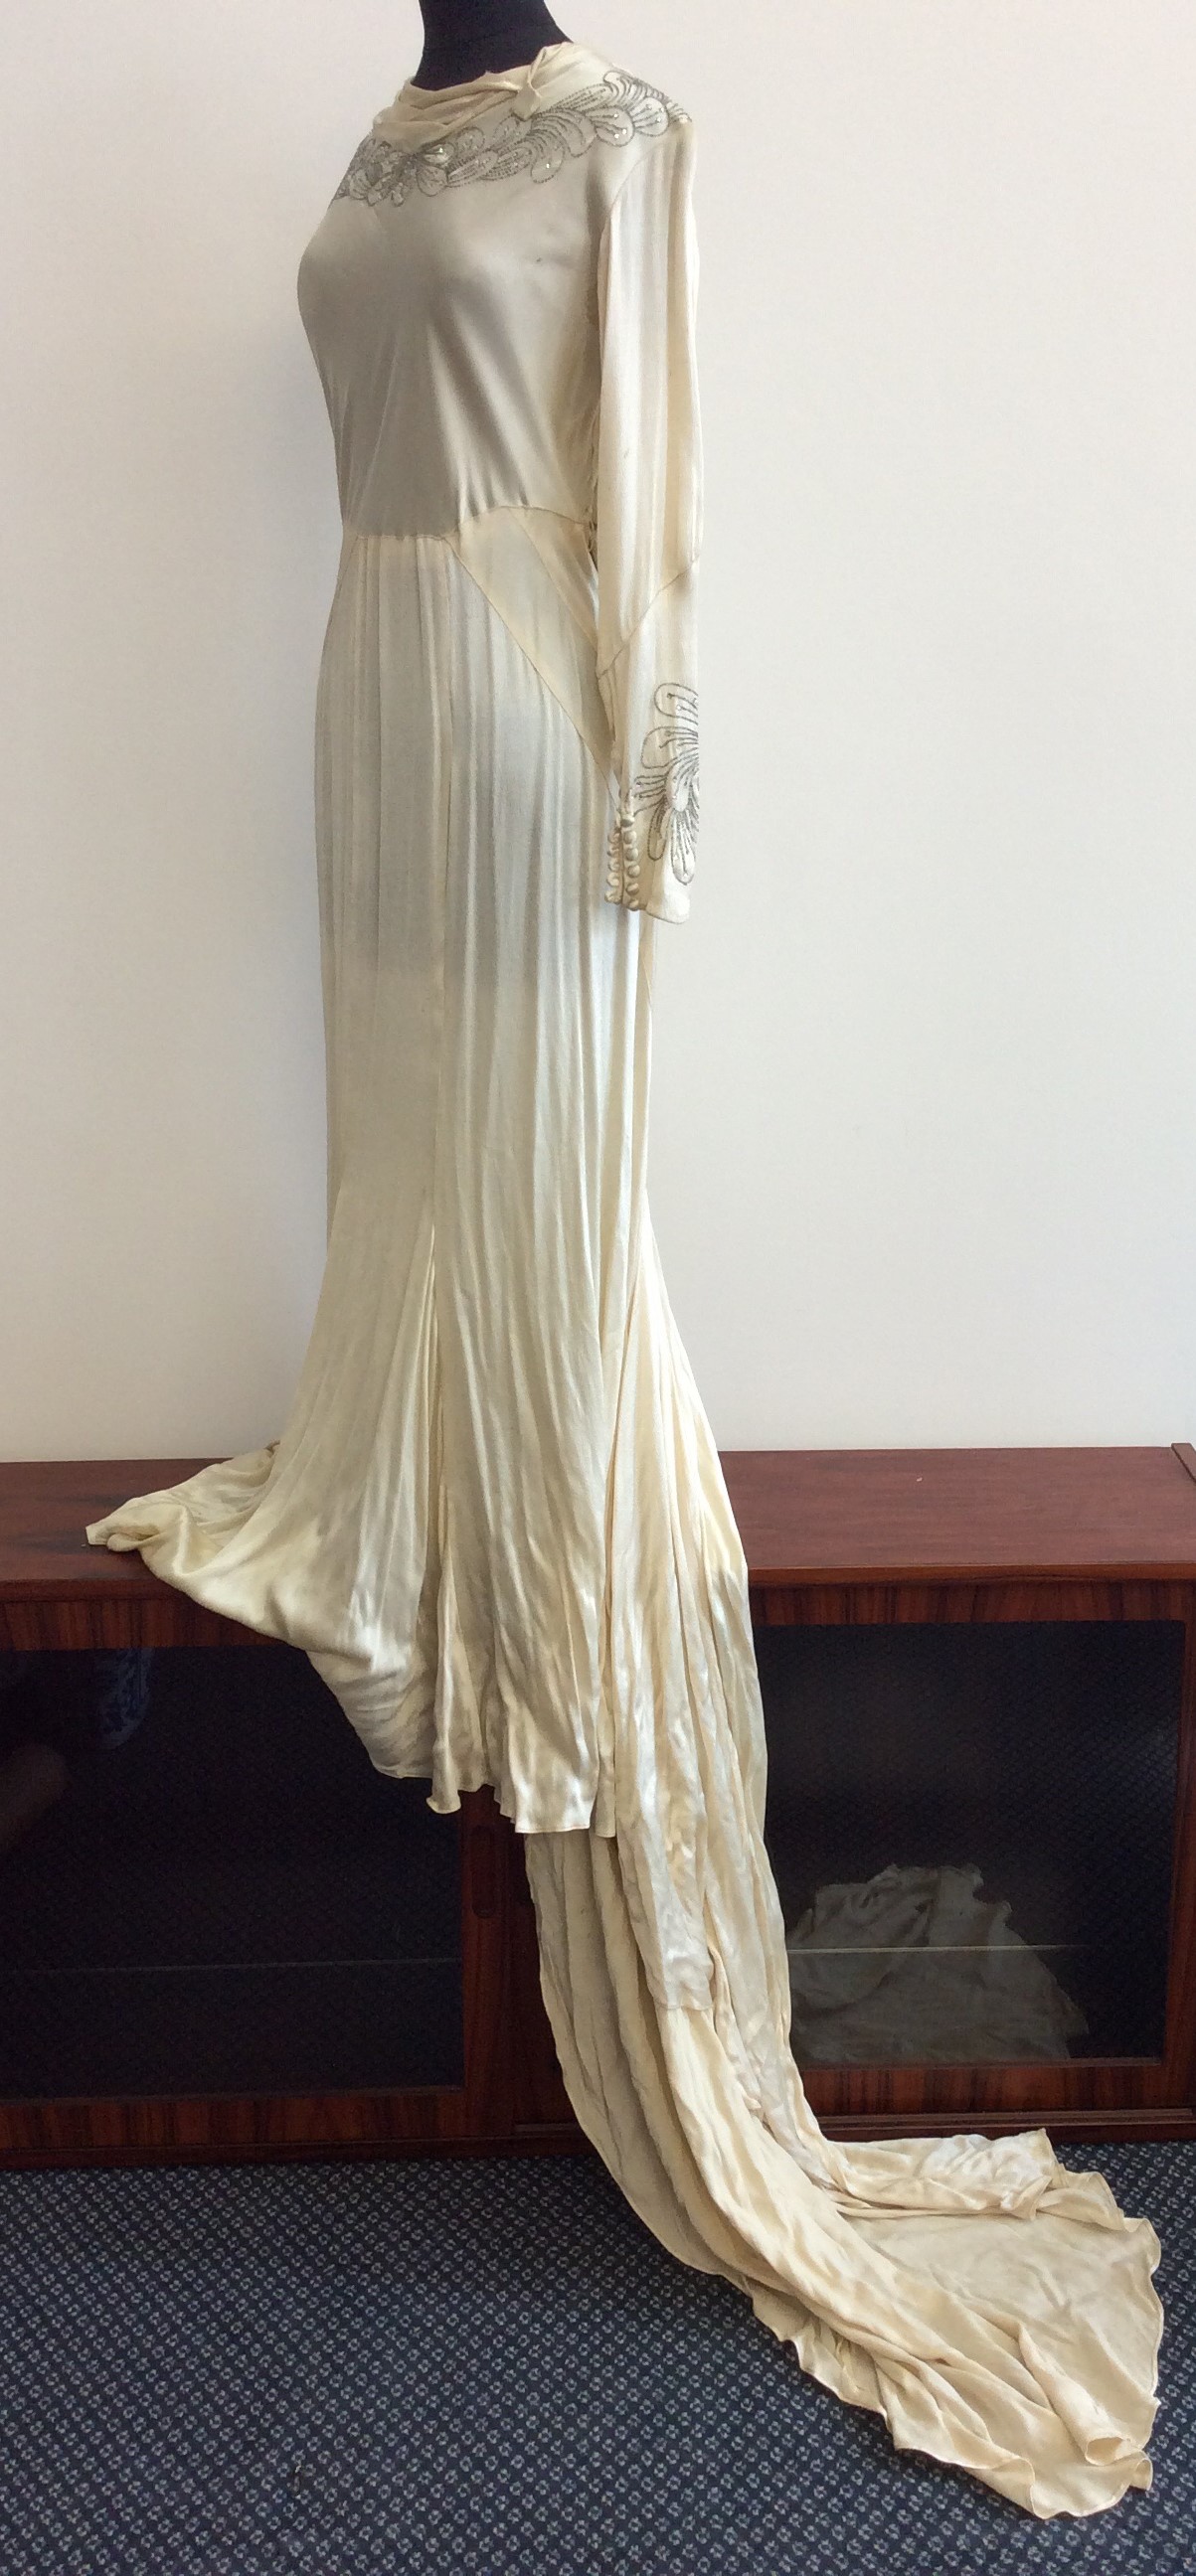 Early 20th century cream wedding dress with silver sequin design. IMPORTANT: Online viewing and